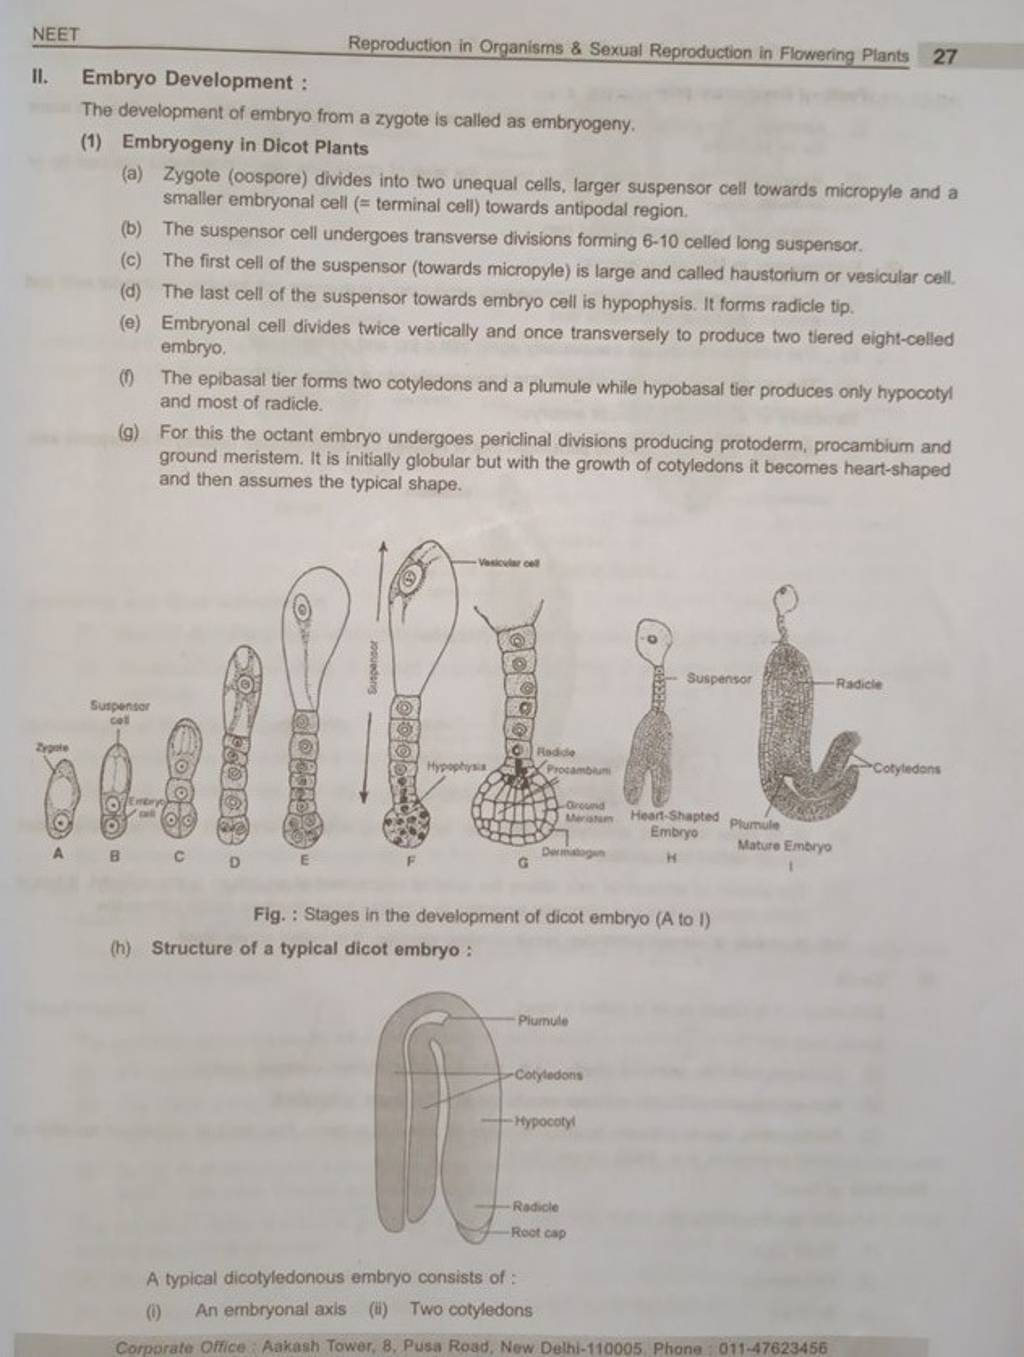 Neet Reproduction In Organisms 8 Sexual Reproduction In Flowering Plants 